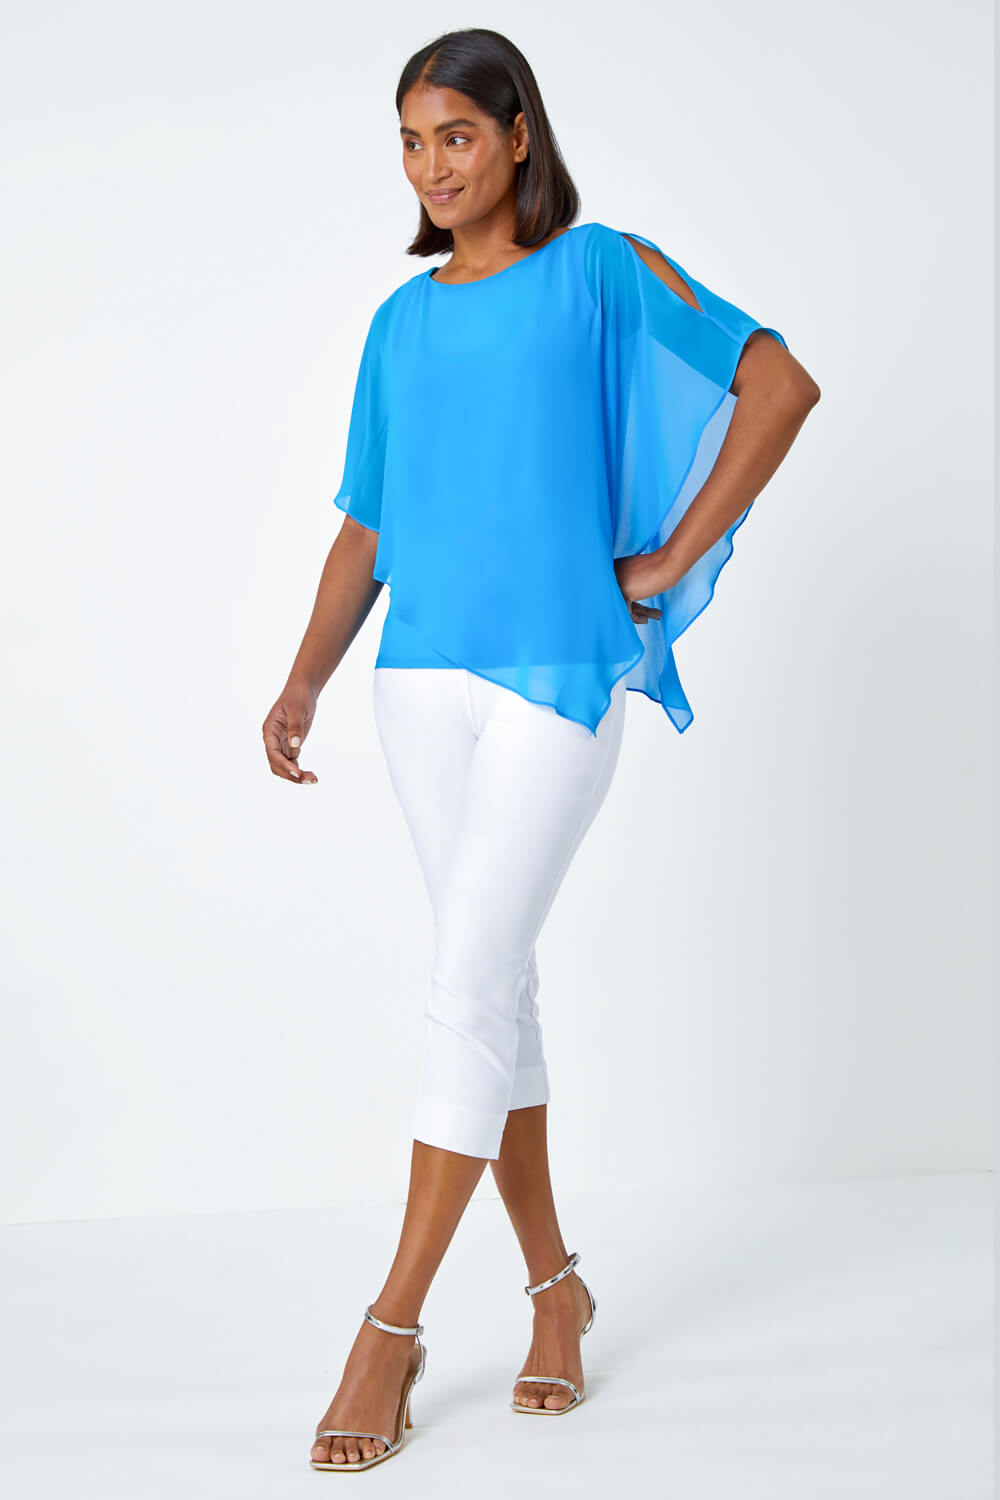 Turquoise Asymmetric Cold Shoulder Stretch Top, Image 2 of 5